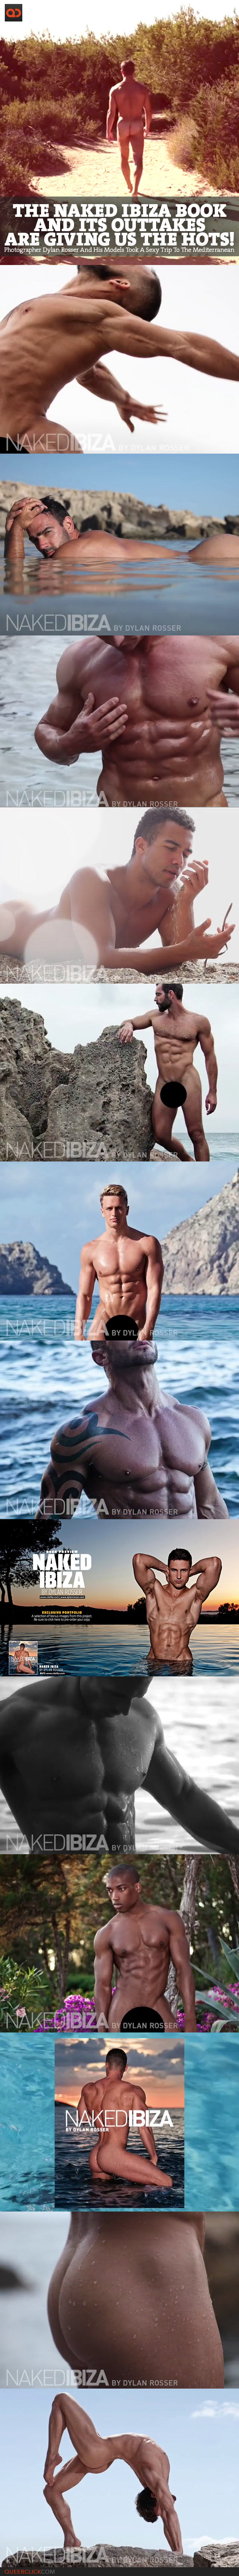 qc-hunks_from_the_naked_ibiza_book-collage